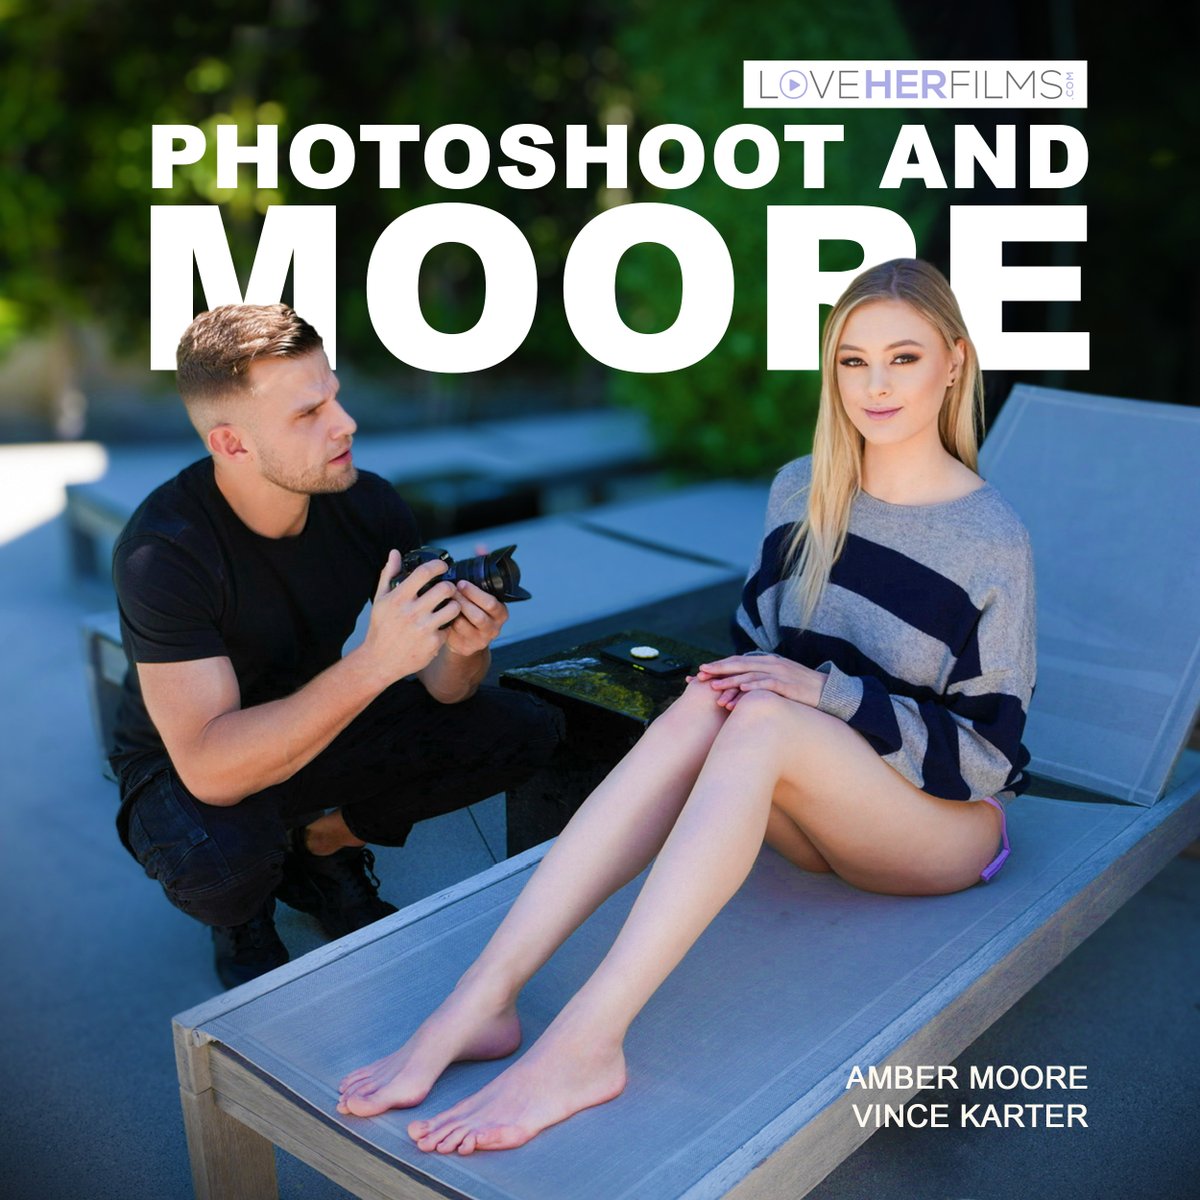 Amber Moore sets foot on Vince Karter's set to do photoshoot and 'moore'. Find out what 'moore' she got only on LoveHerFilms.com! 📸 @AmberMooreXXX @Vincexxxx @loveherfeetcom #loveherfeet #loveherfilms #ambermoore